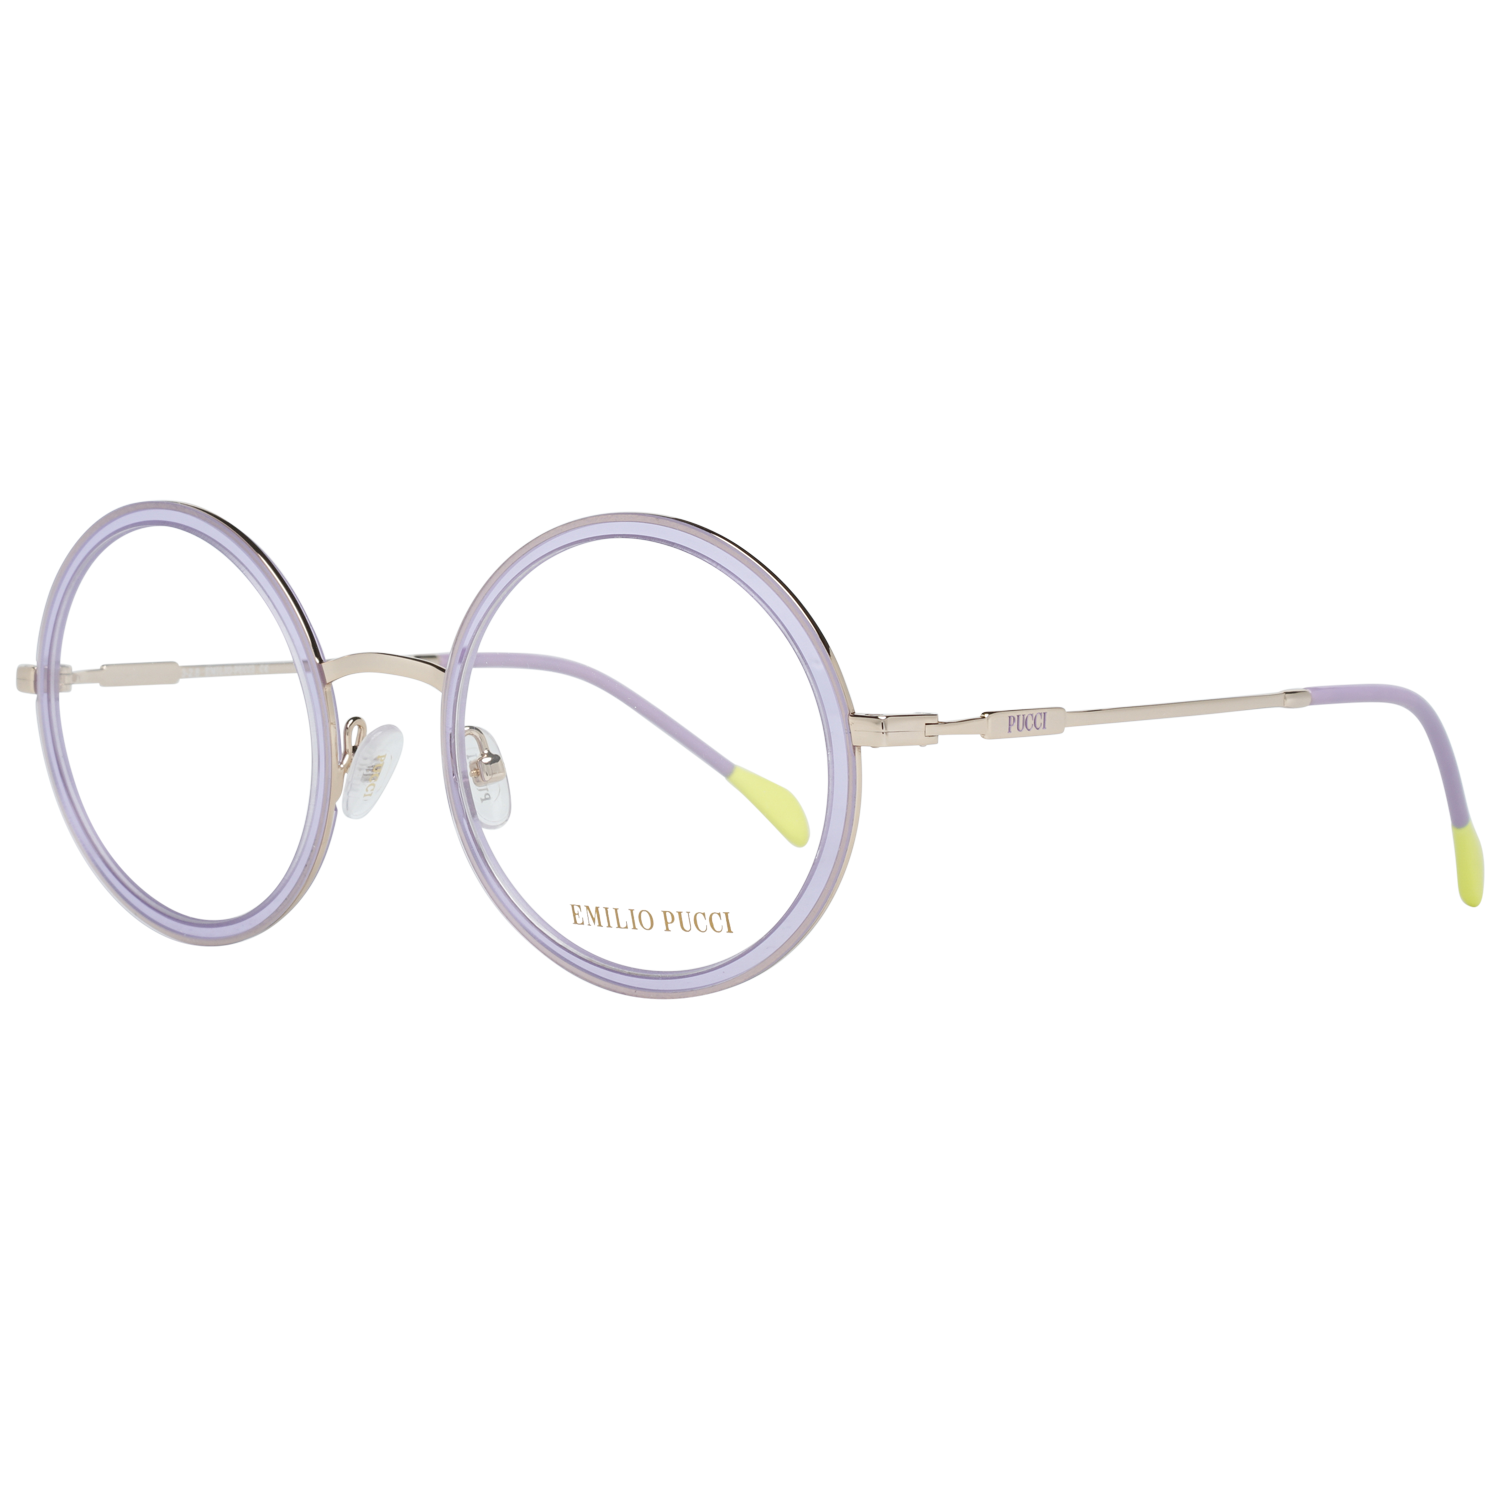 Emilio Pucci Optical Frame EP5113 080 49 Women
Frame color: Gold
Size: 49-23-140
Lenses width: 49
Lenses heigth: 48
Bridge length: 23
Frame width: 136
Temple length: 140
Shipment includes: Case, Cleaning cloth
Style: Full-Rim
Spring hinge: No